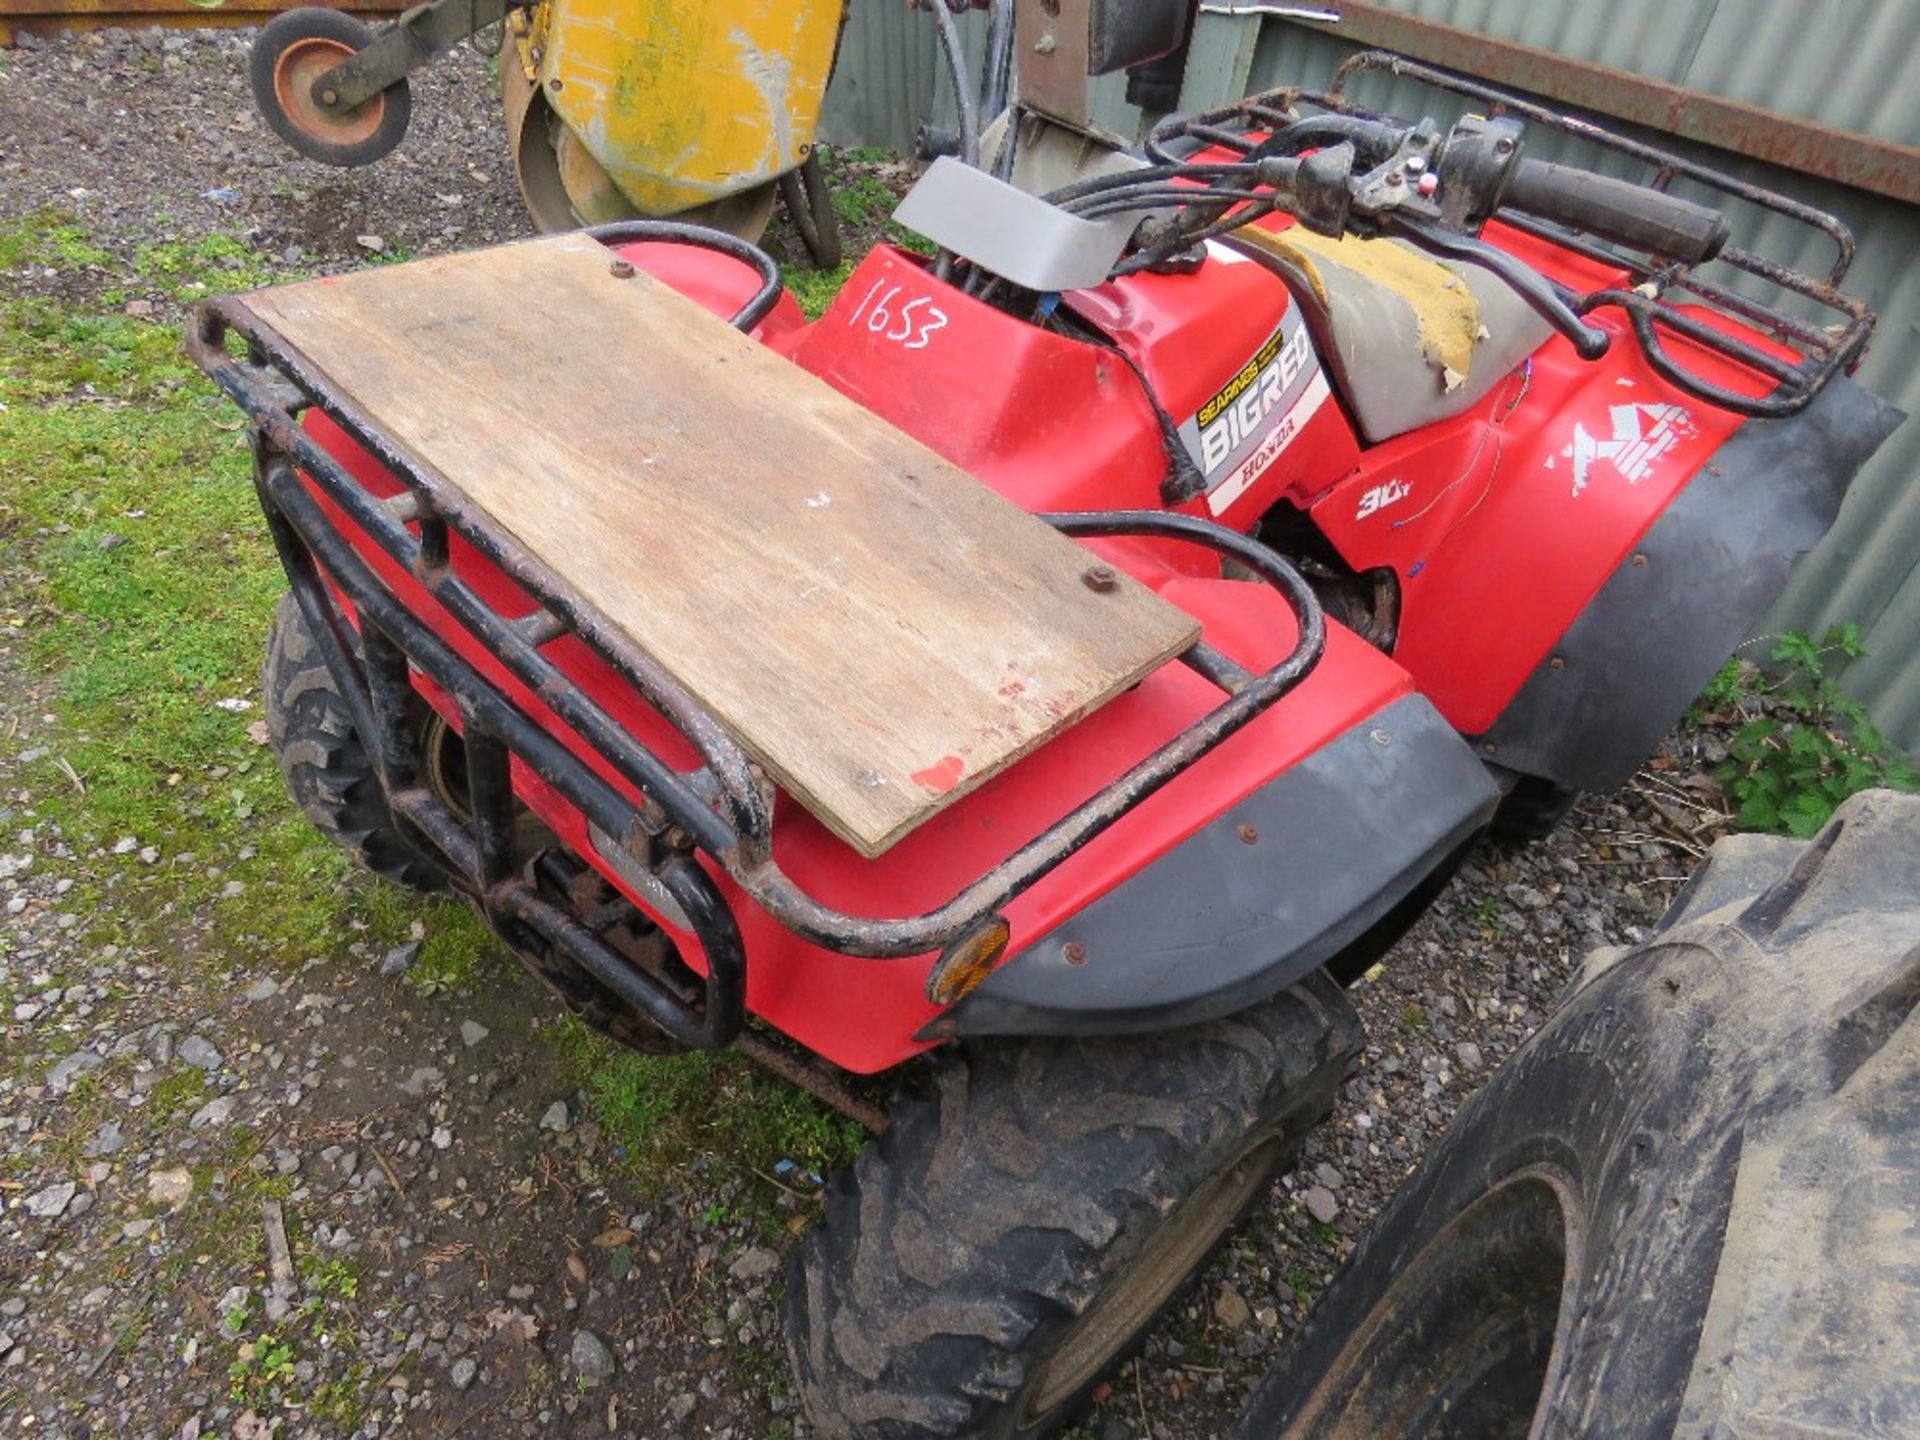 HONDA BIG RED 4WD PETROL ENGINED QUAD BIKE. WHEN TESTED WAS SEEN TO DRIVE, STEER AND BRAKE SOURCED F - Image 2 of 9